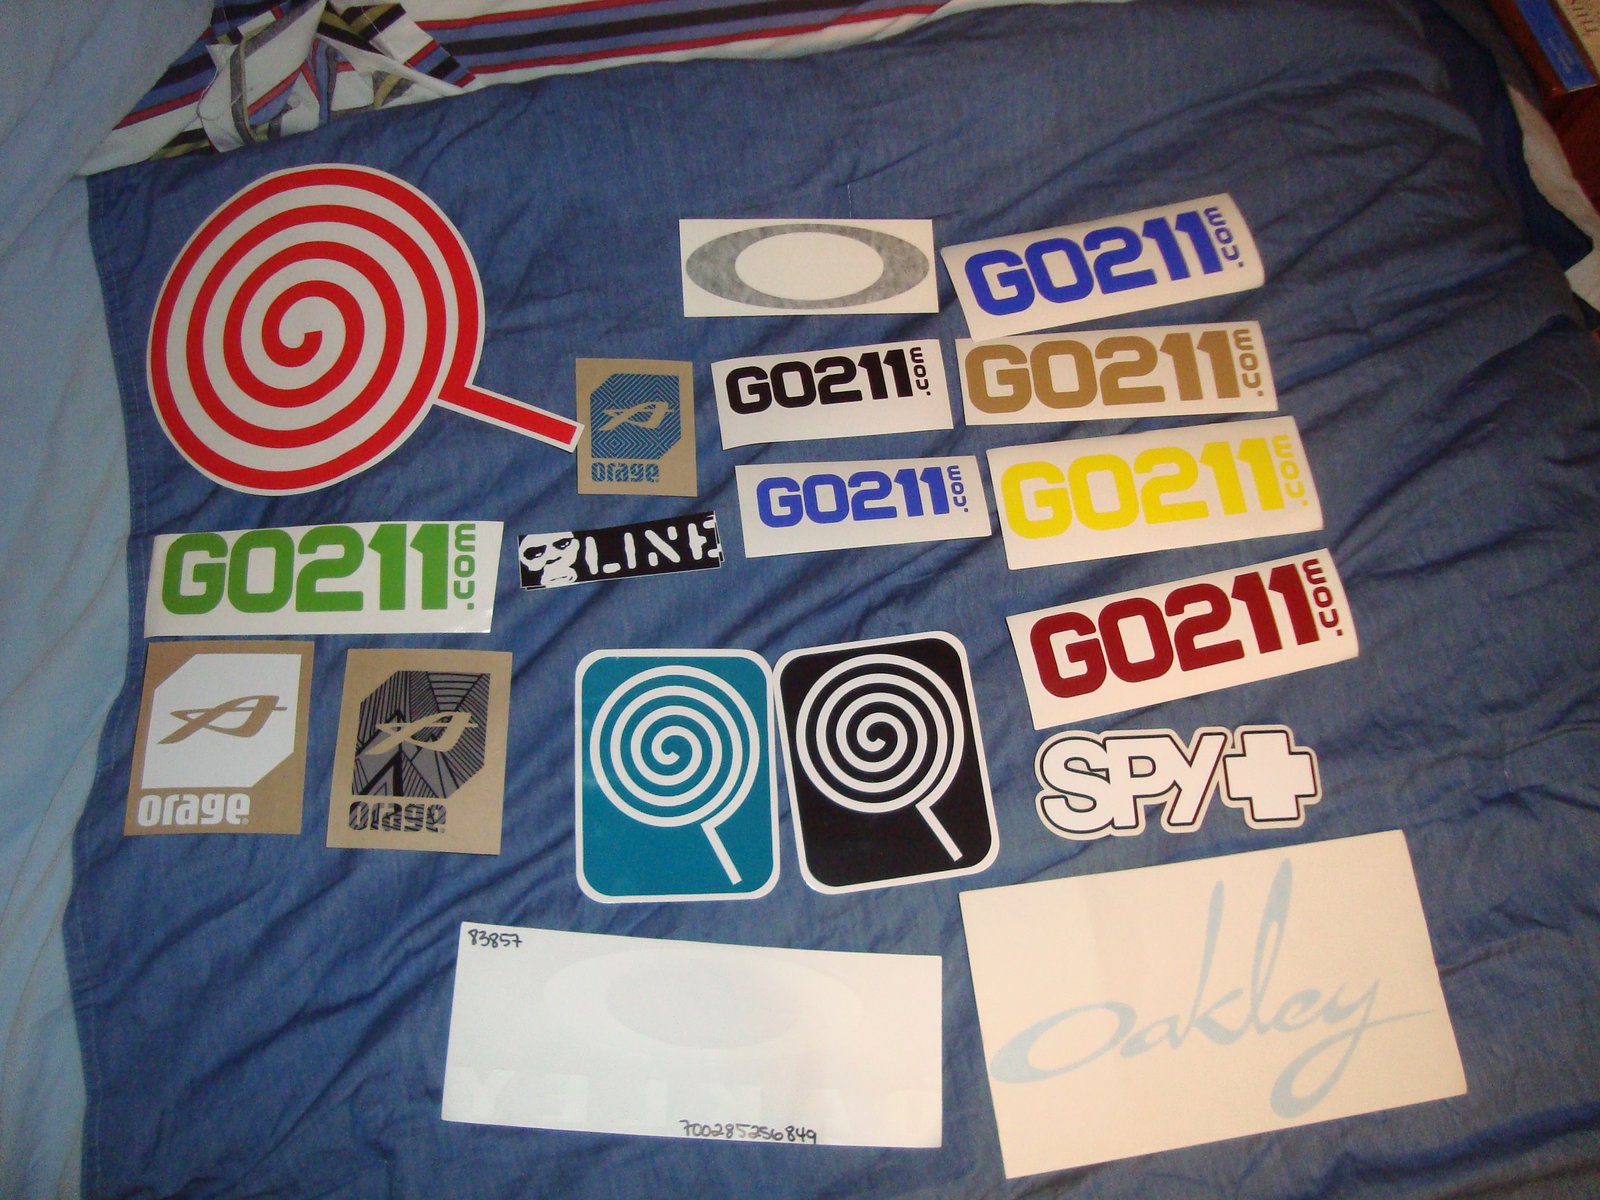 Stickerrs, possibly for sale/trade